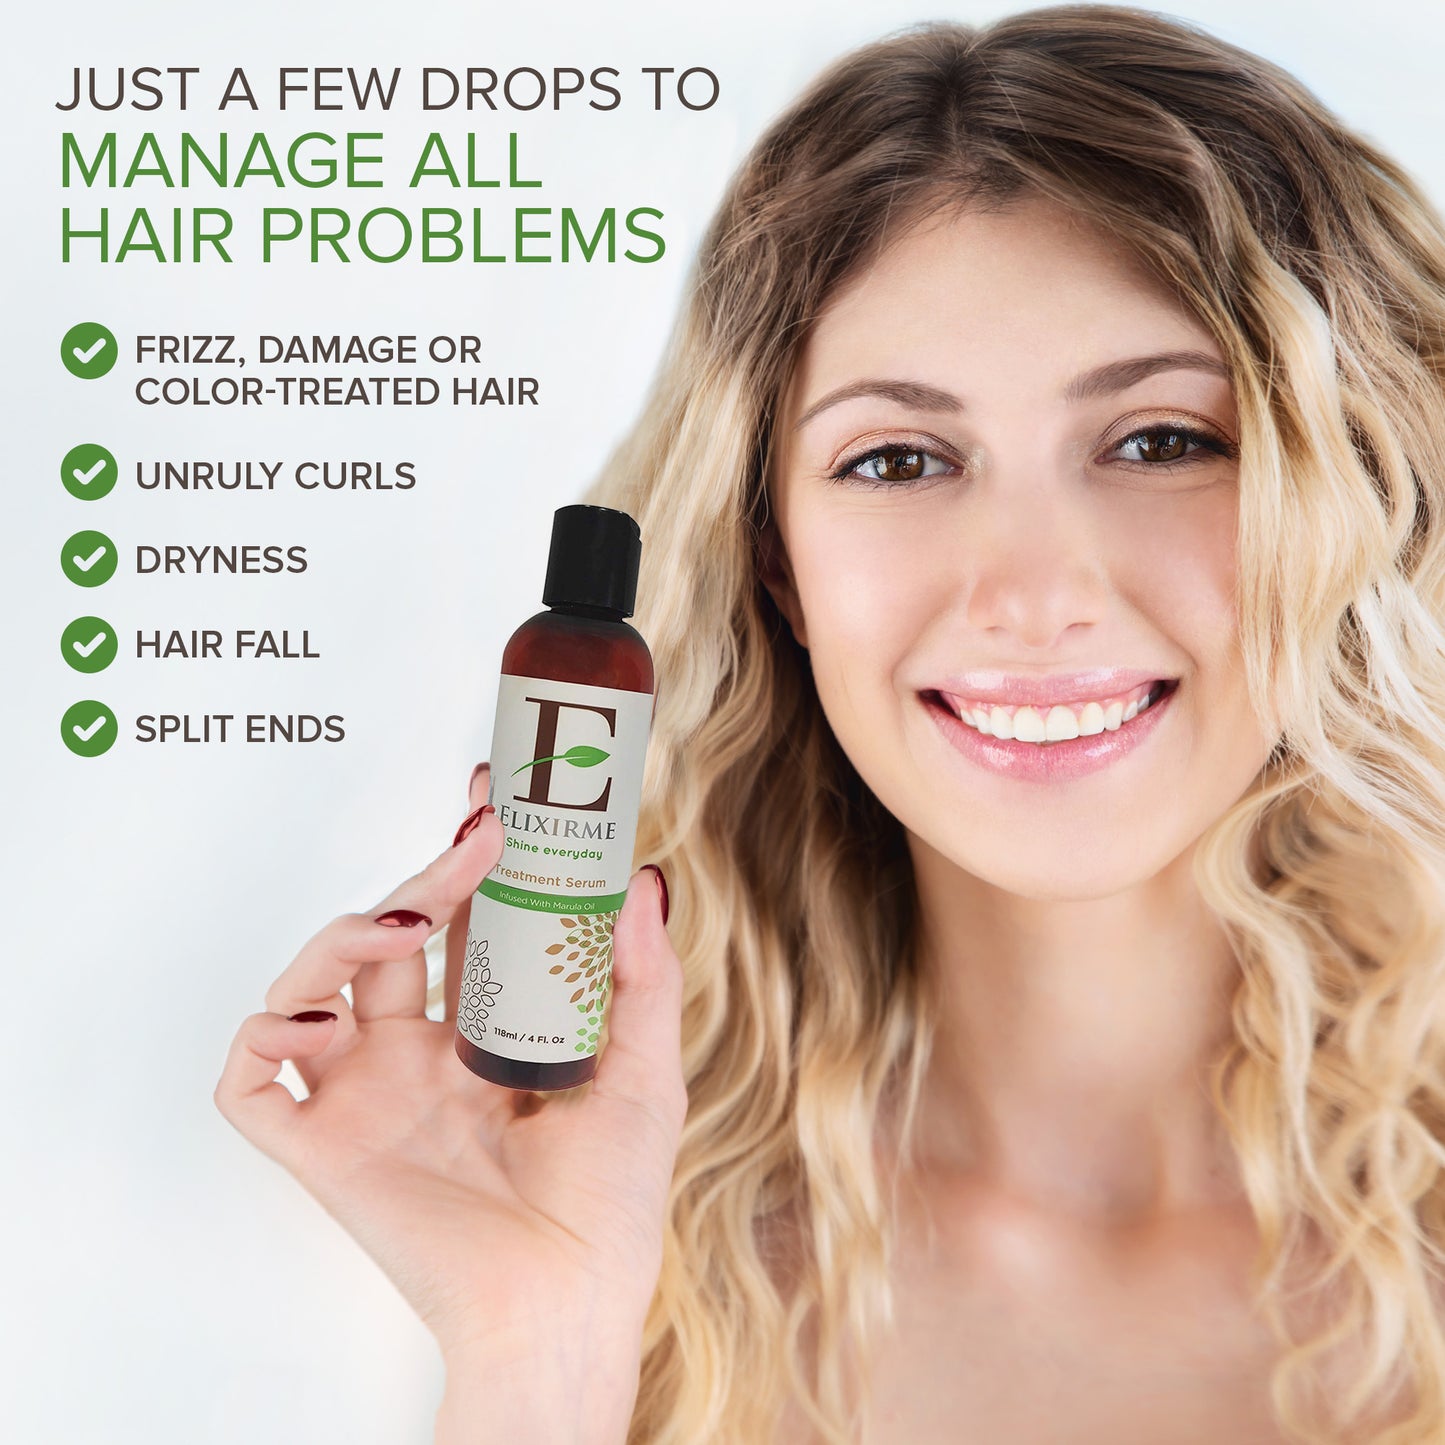 ElixirMe Hair Serum for Frizz Control, Shine, Repair and Smooth ends.